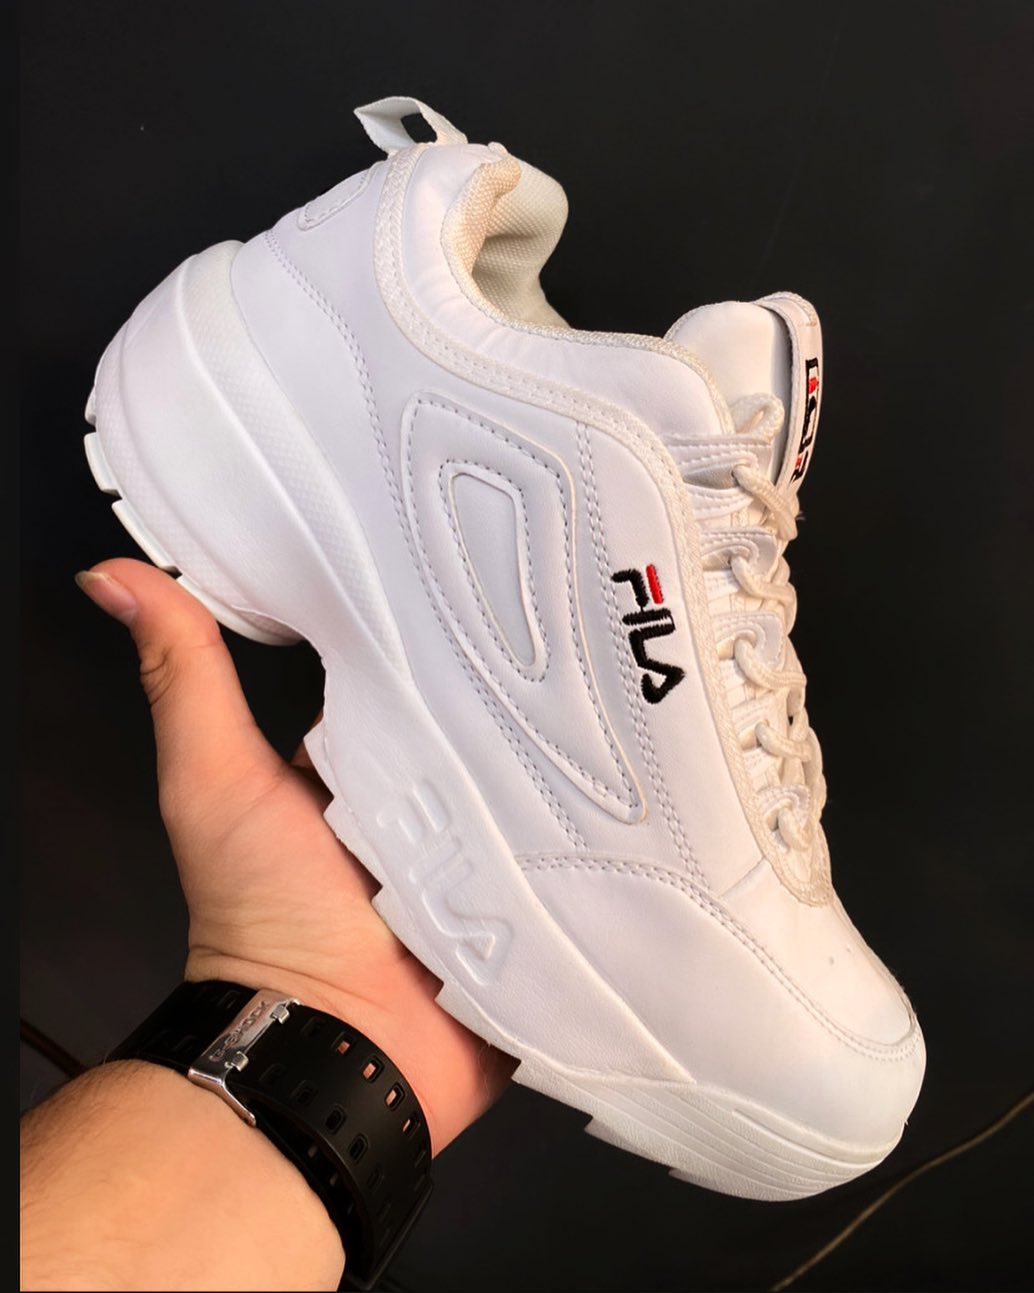 Fila Disruptor Ii White Ankle-High Patent Leather Fashion Sneaker